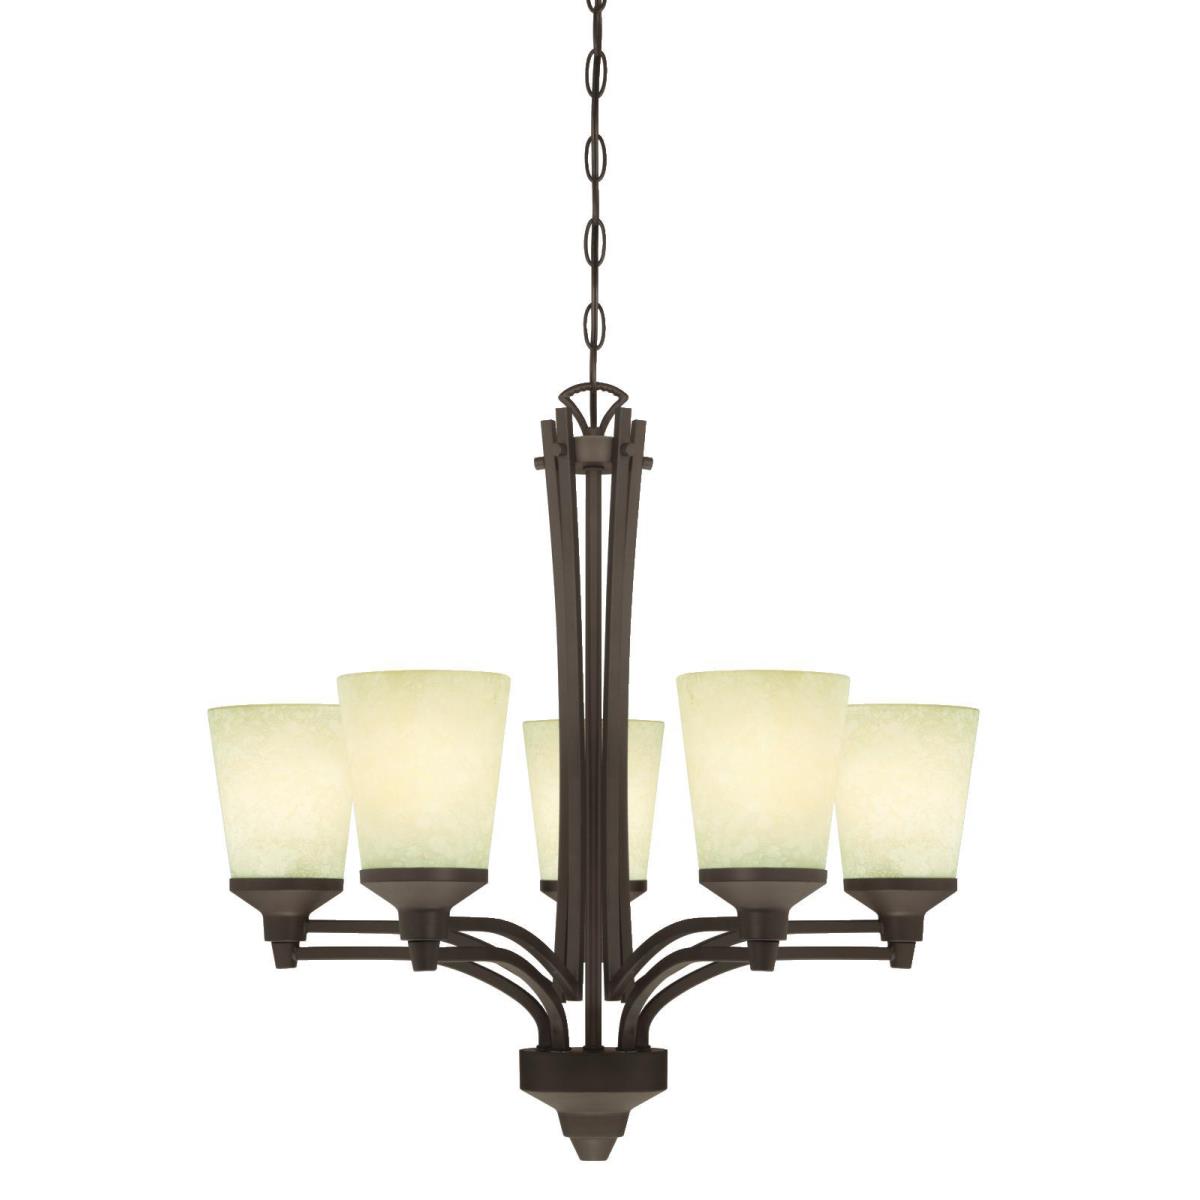 5 Light Chandelier Oil Rubbed Bronze Finish with Smoldering Scavo Glass